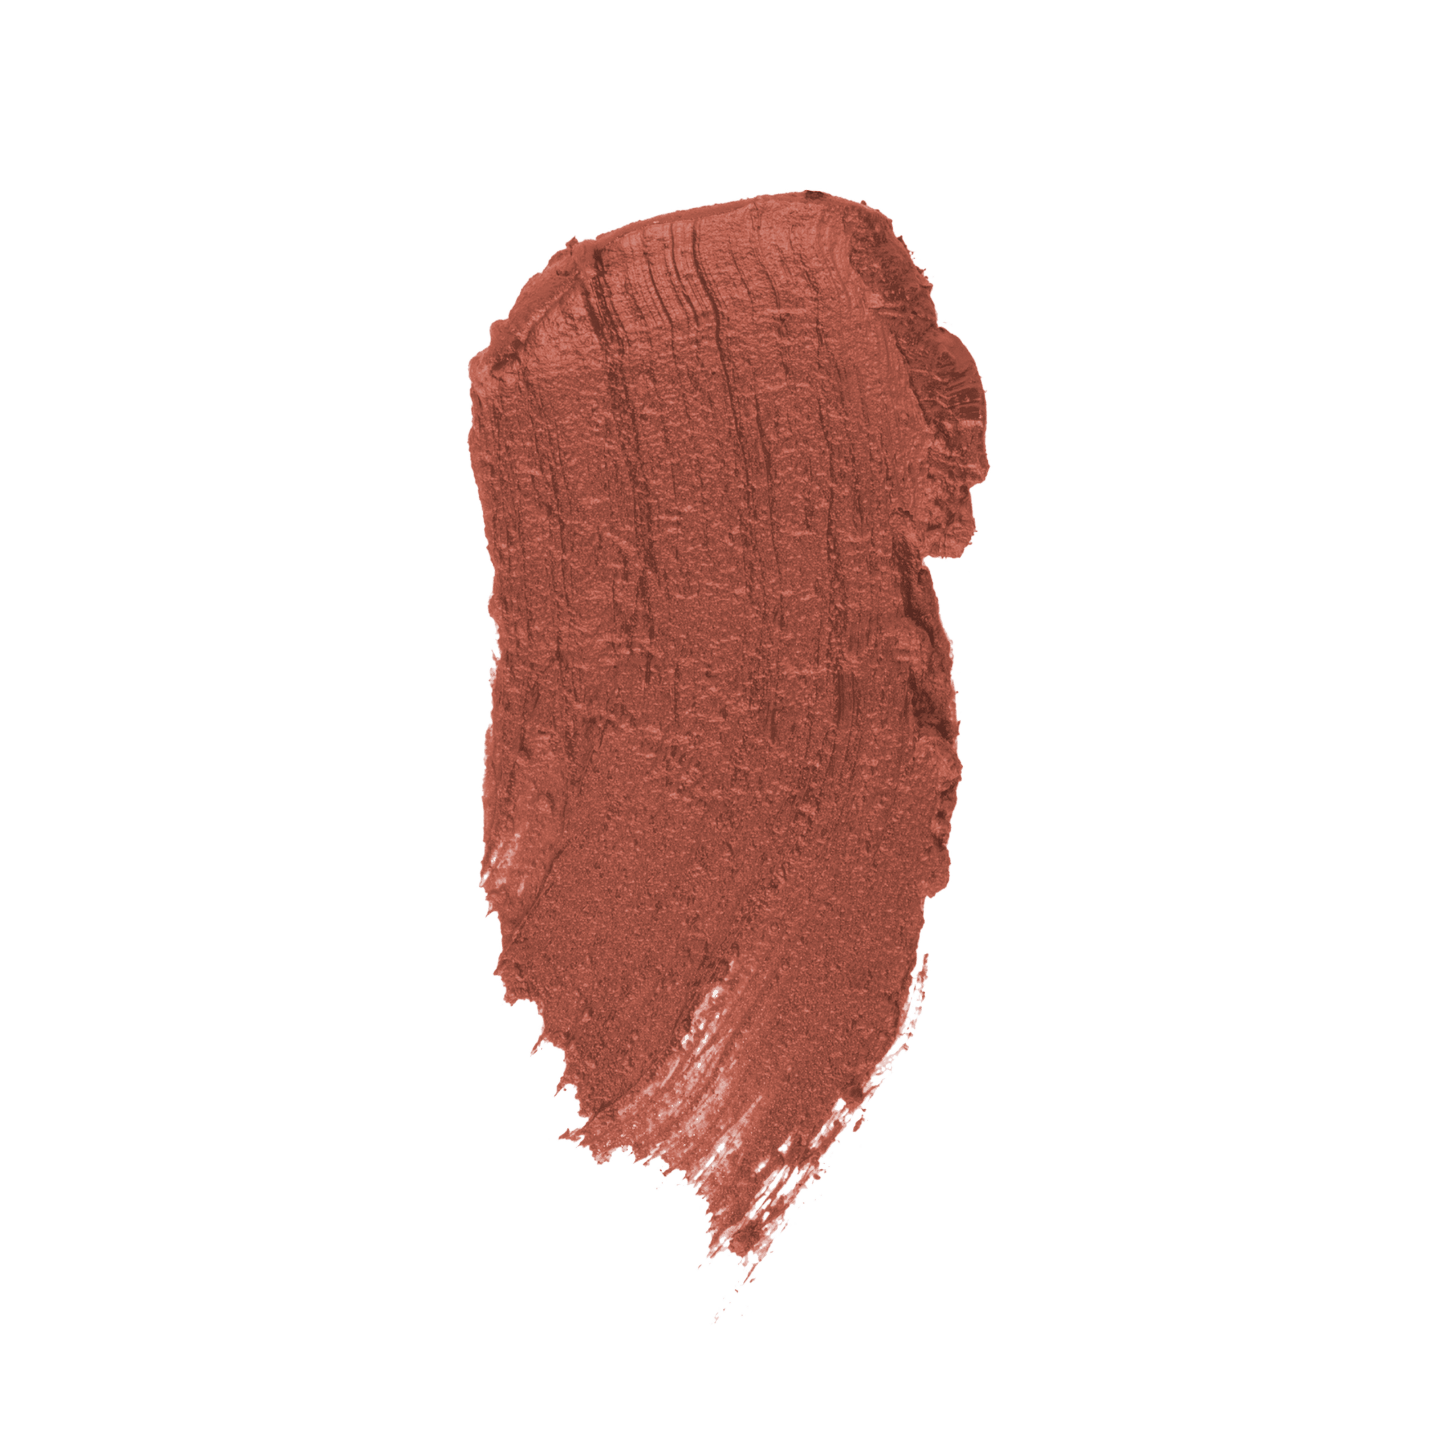 Toasted Nutmeg (warm red-brown)